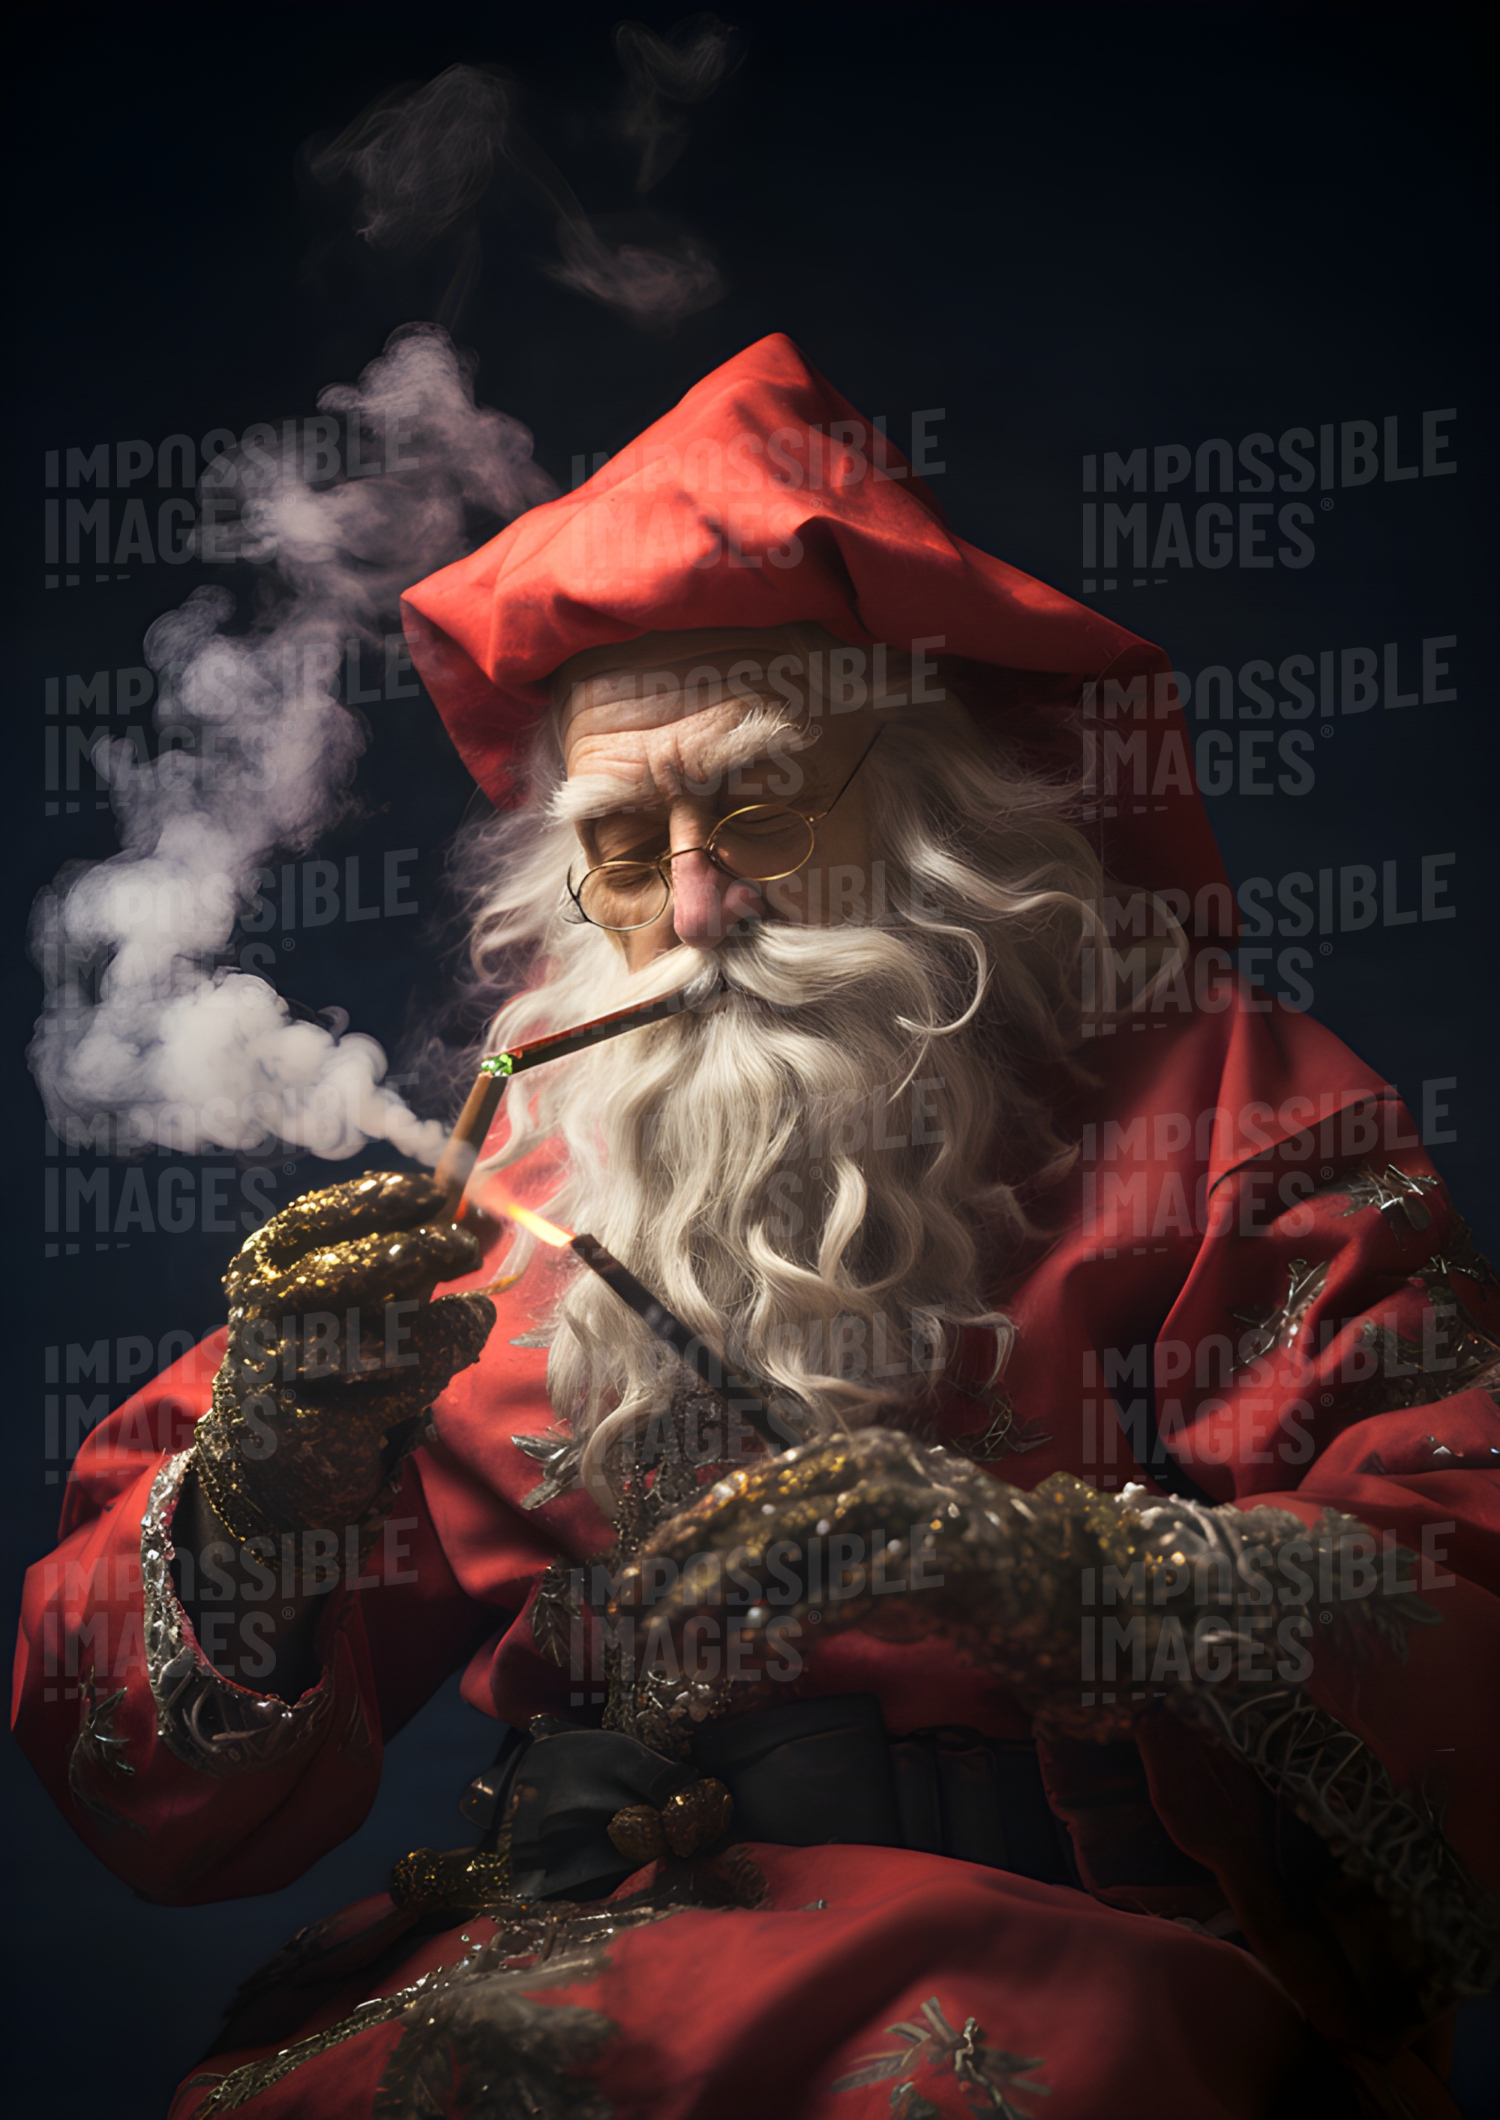 Santa with a crack pipe -  Santa Claus, a beloved figure of Christmas, is depicted with a crack pipe in his hand, a shocking and unexpected sight.